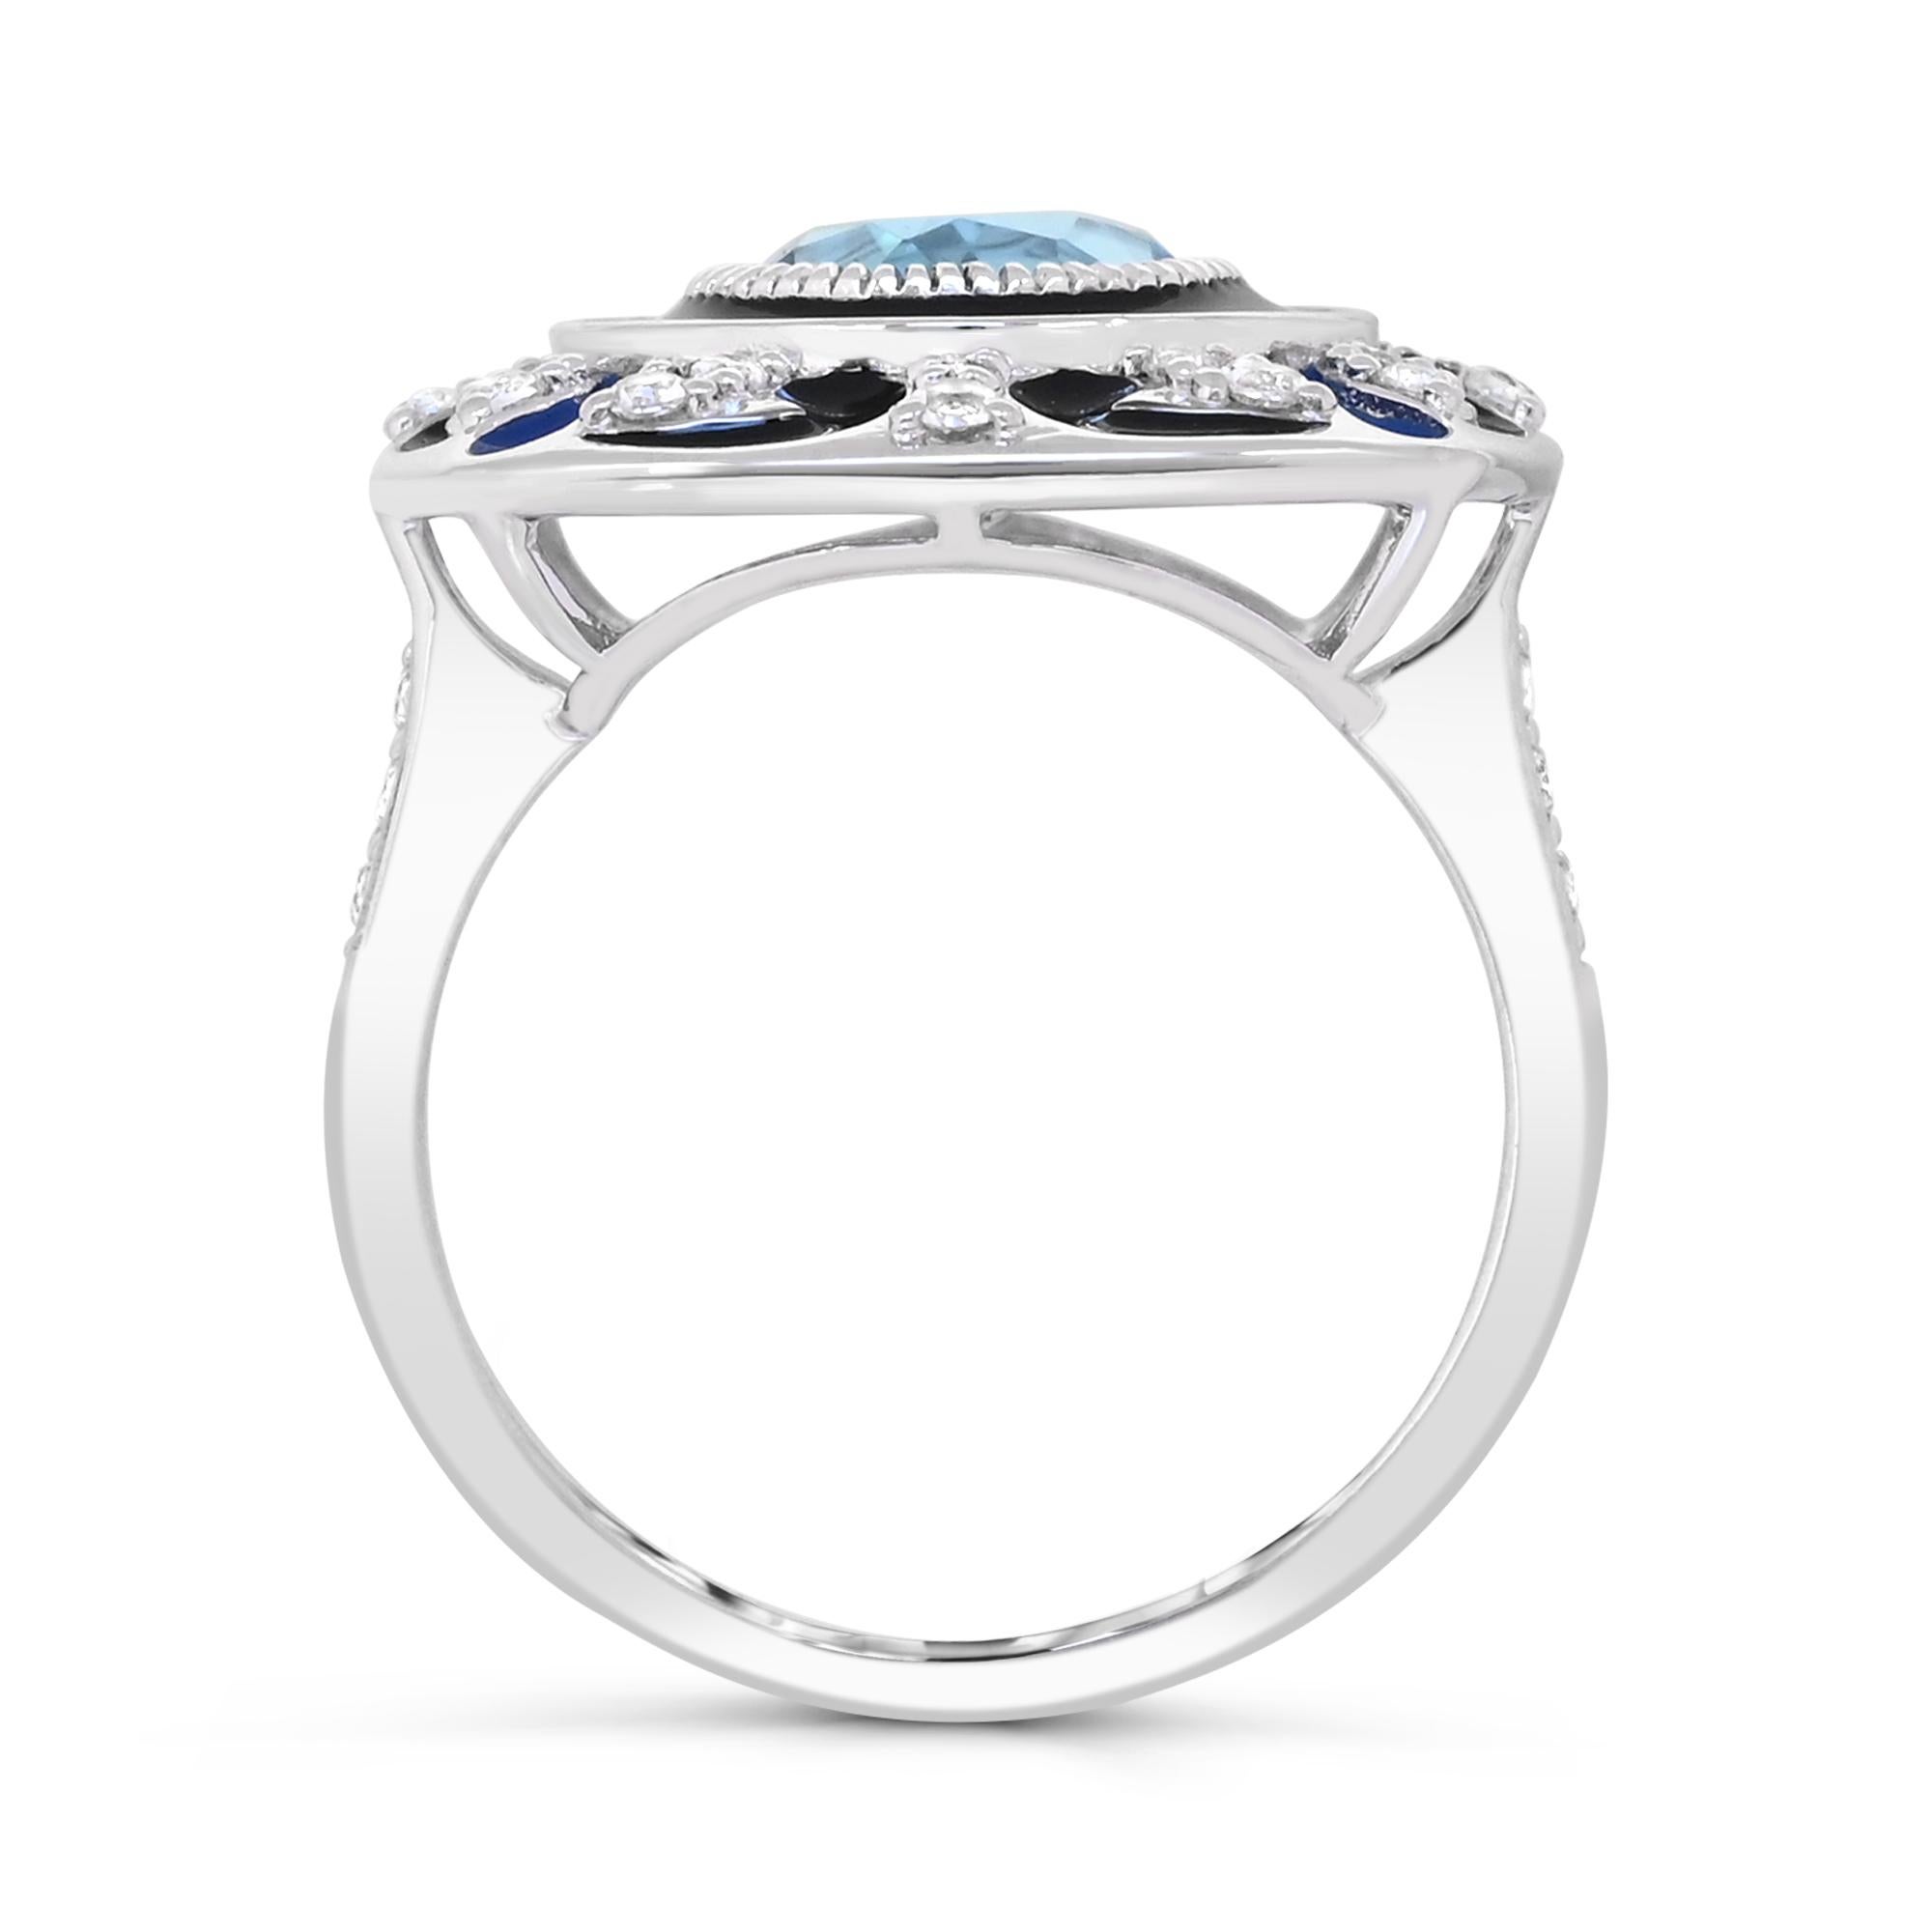 Round Cut 3-1/6 ct. Swiss Blue/White Topaz and Black/Blue Enamel Sterling Silver Ring